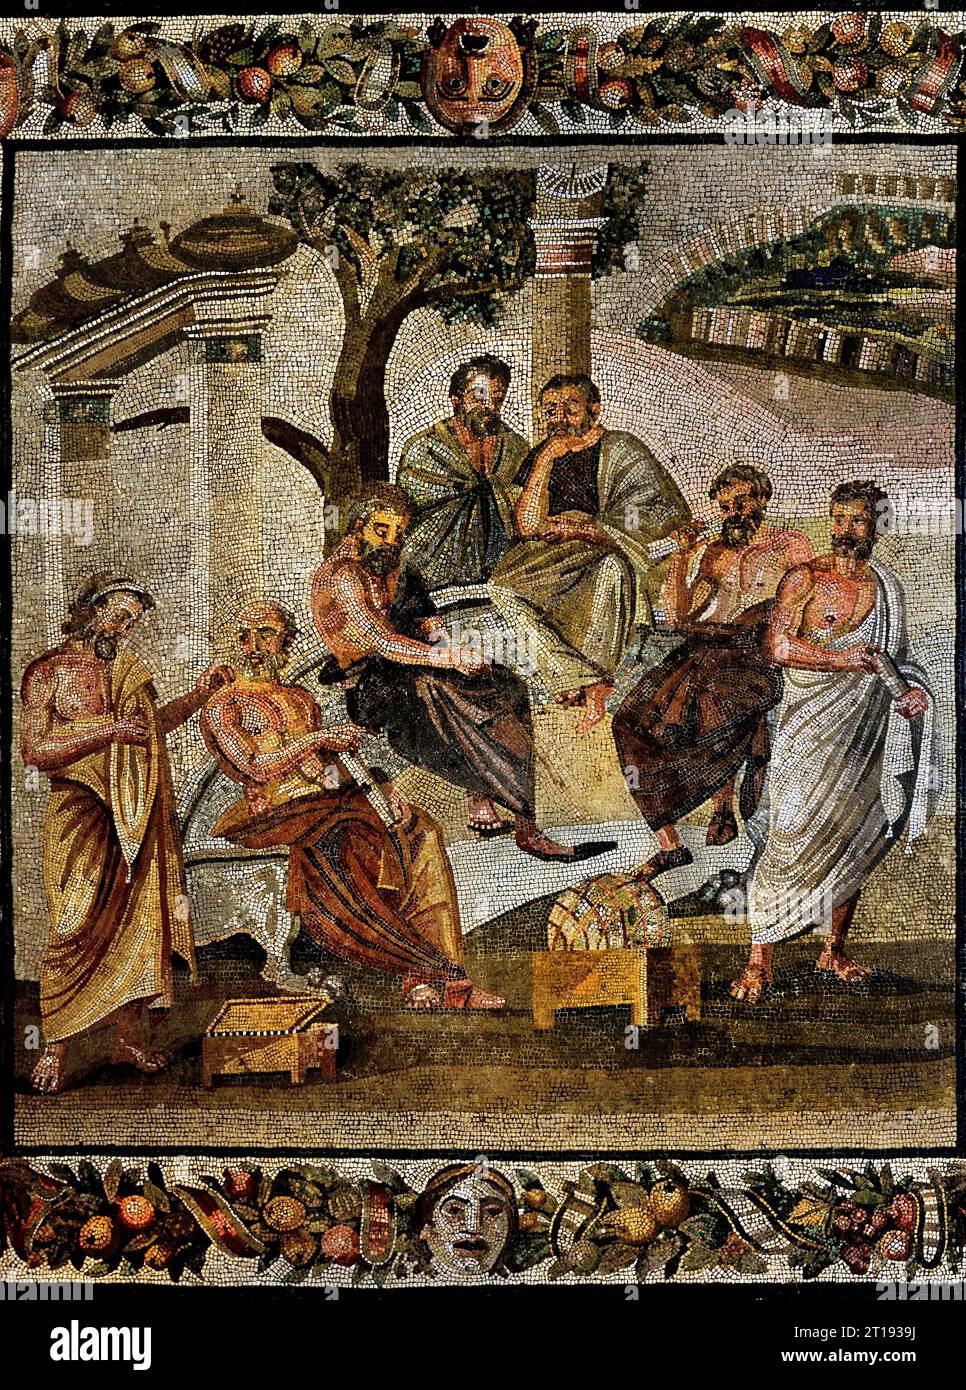 Plato Conversing with his Pupils, ( Plato was an Athenian philosopher during the Classical period in Ancient Greece, founder of the Platonist  )  from the House of T. Siminius, mosaic from Pompeii Roman City is located near Naples in the Campania region of Italy. Pompeii was buried under 4-6 m of volcanic ash and pumice in the eruption of Mount Vesuvius in AD 79. Italy, Museum, Naples, Stock Photo